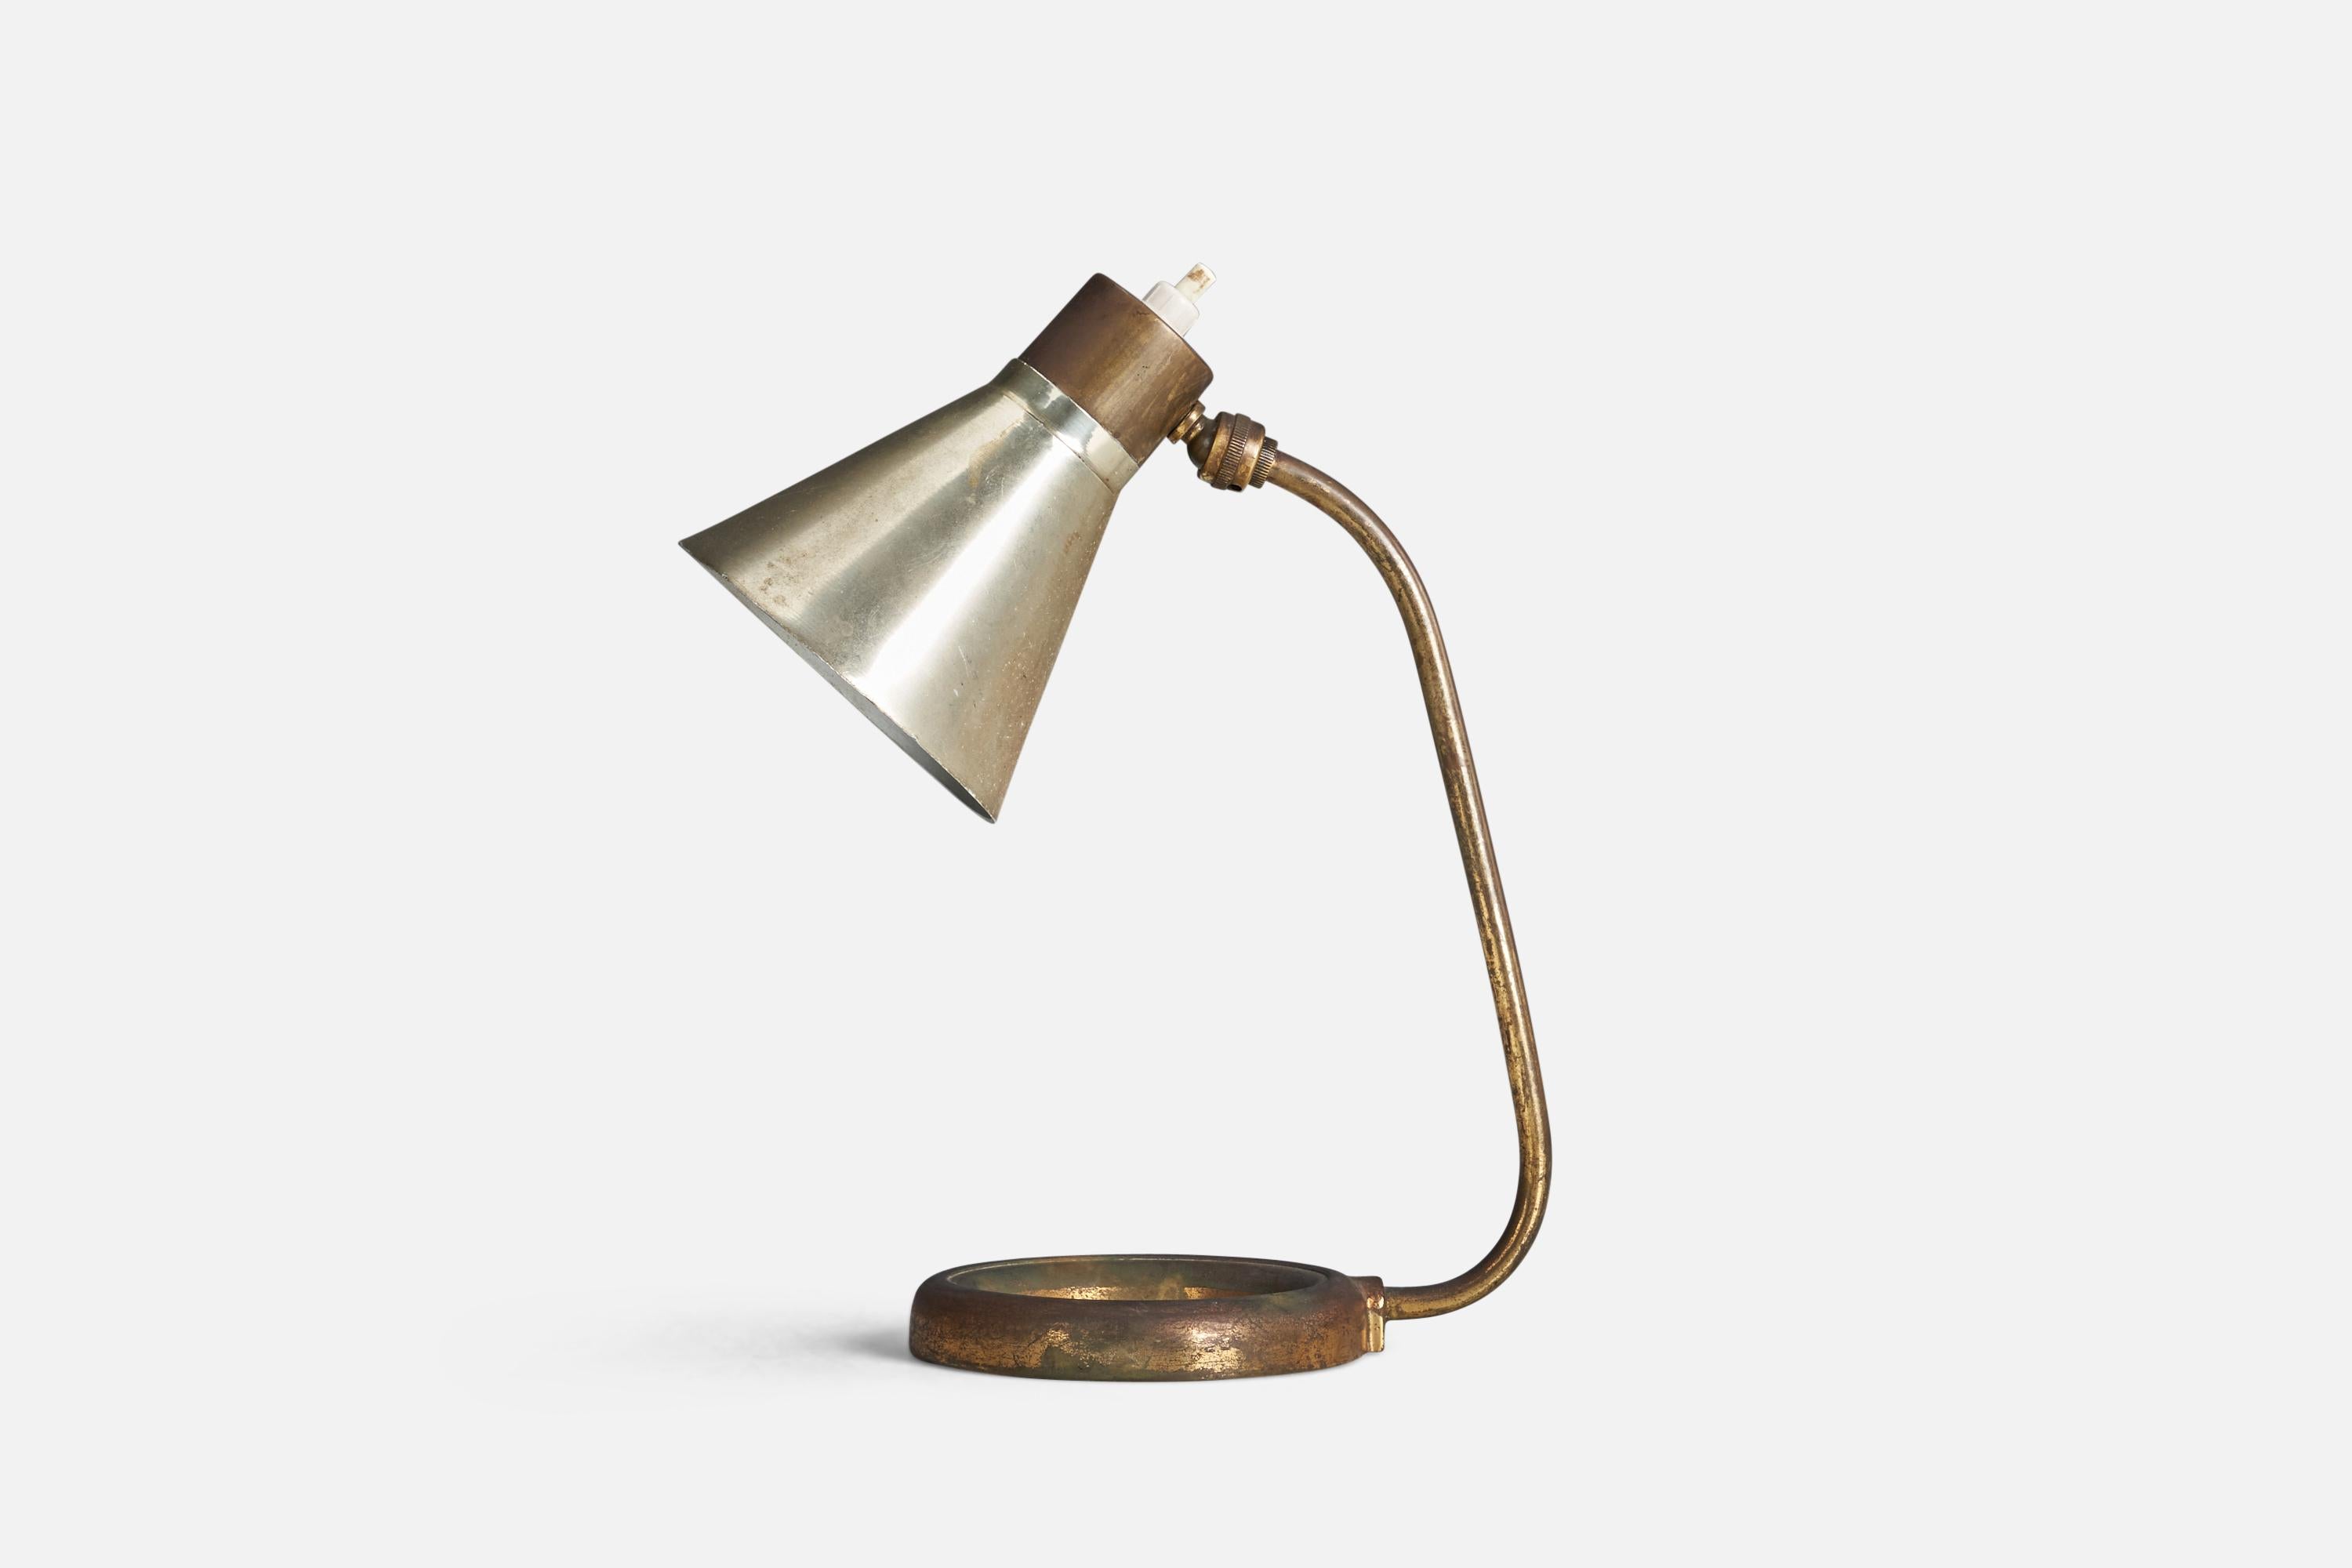 A brass, metal table lamp designed and produced by an Italian Designer, Italy, 1940s.

Socket takes standard E-26 medium base bulb.

There is no maximum wattage stated on the fixture.